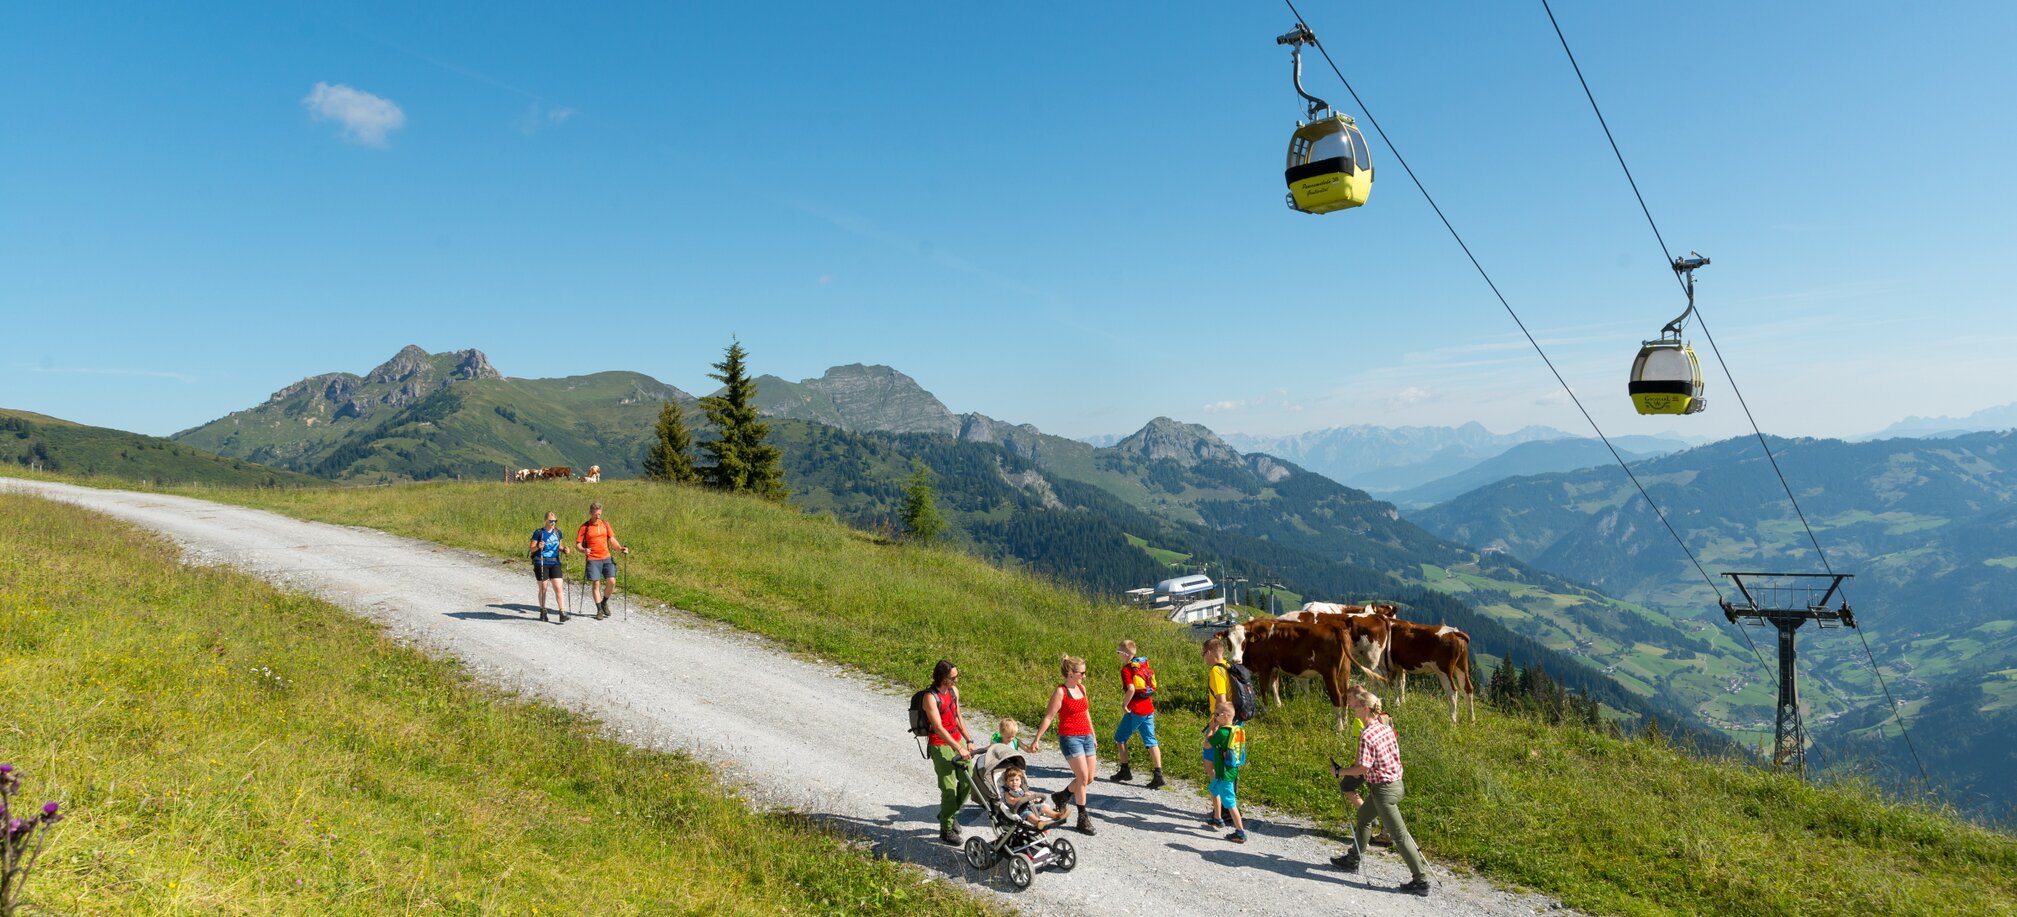 People walk up the mountain on a gravel road under a cable car